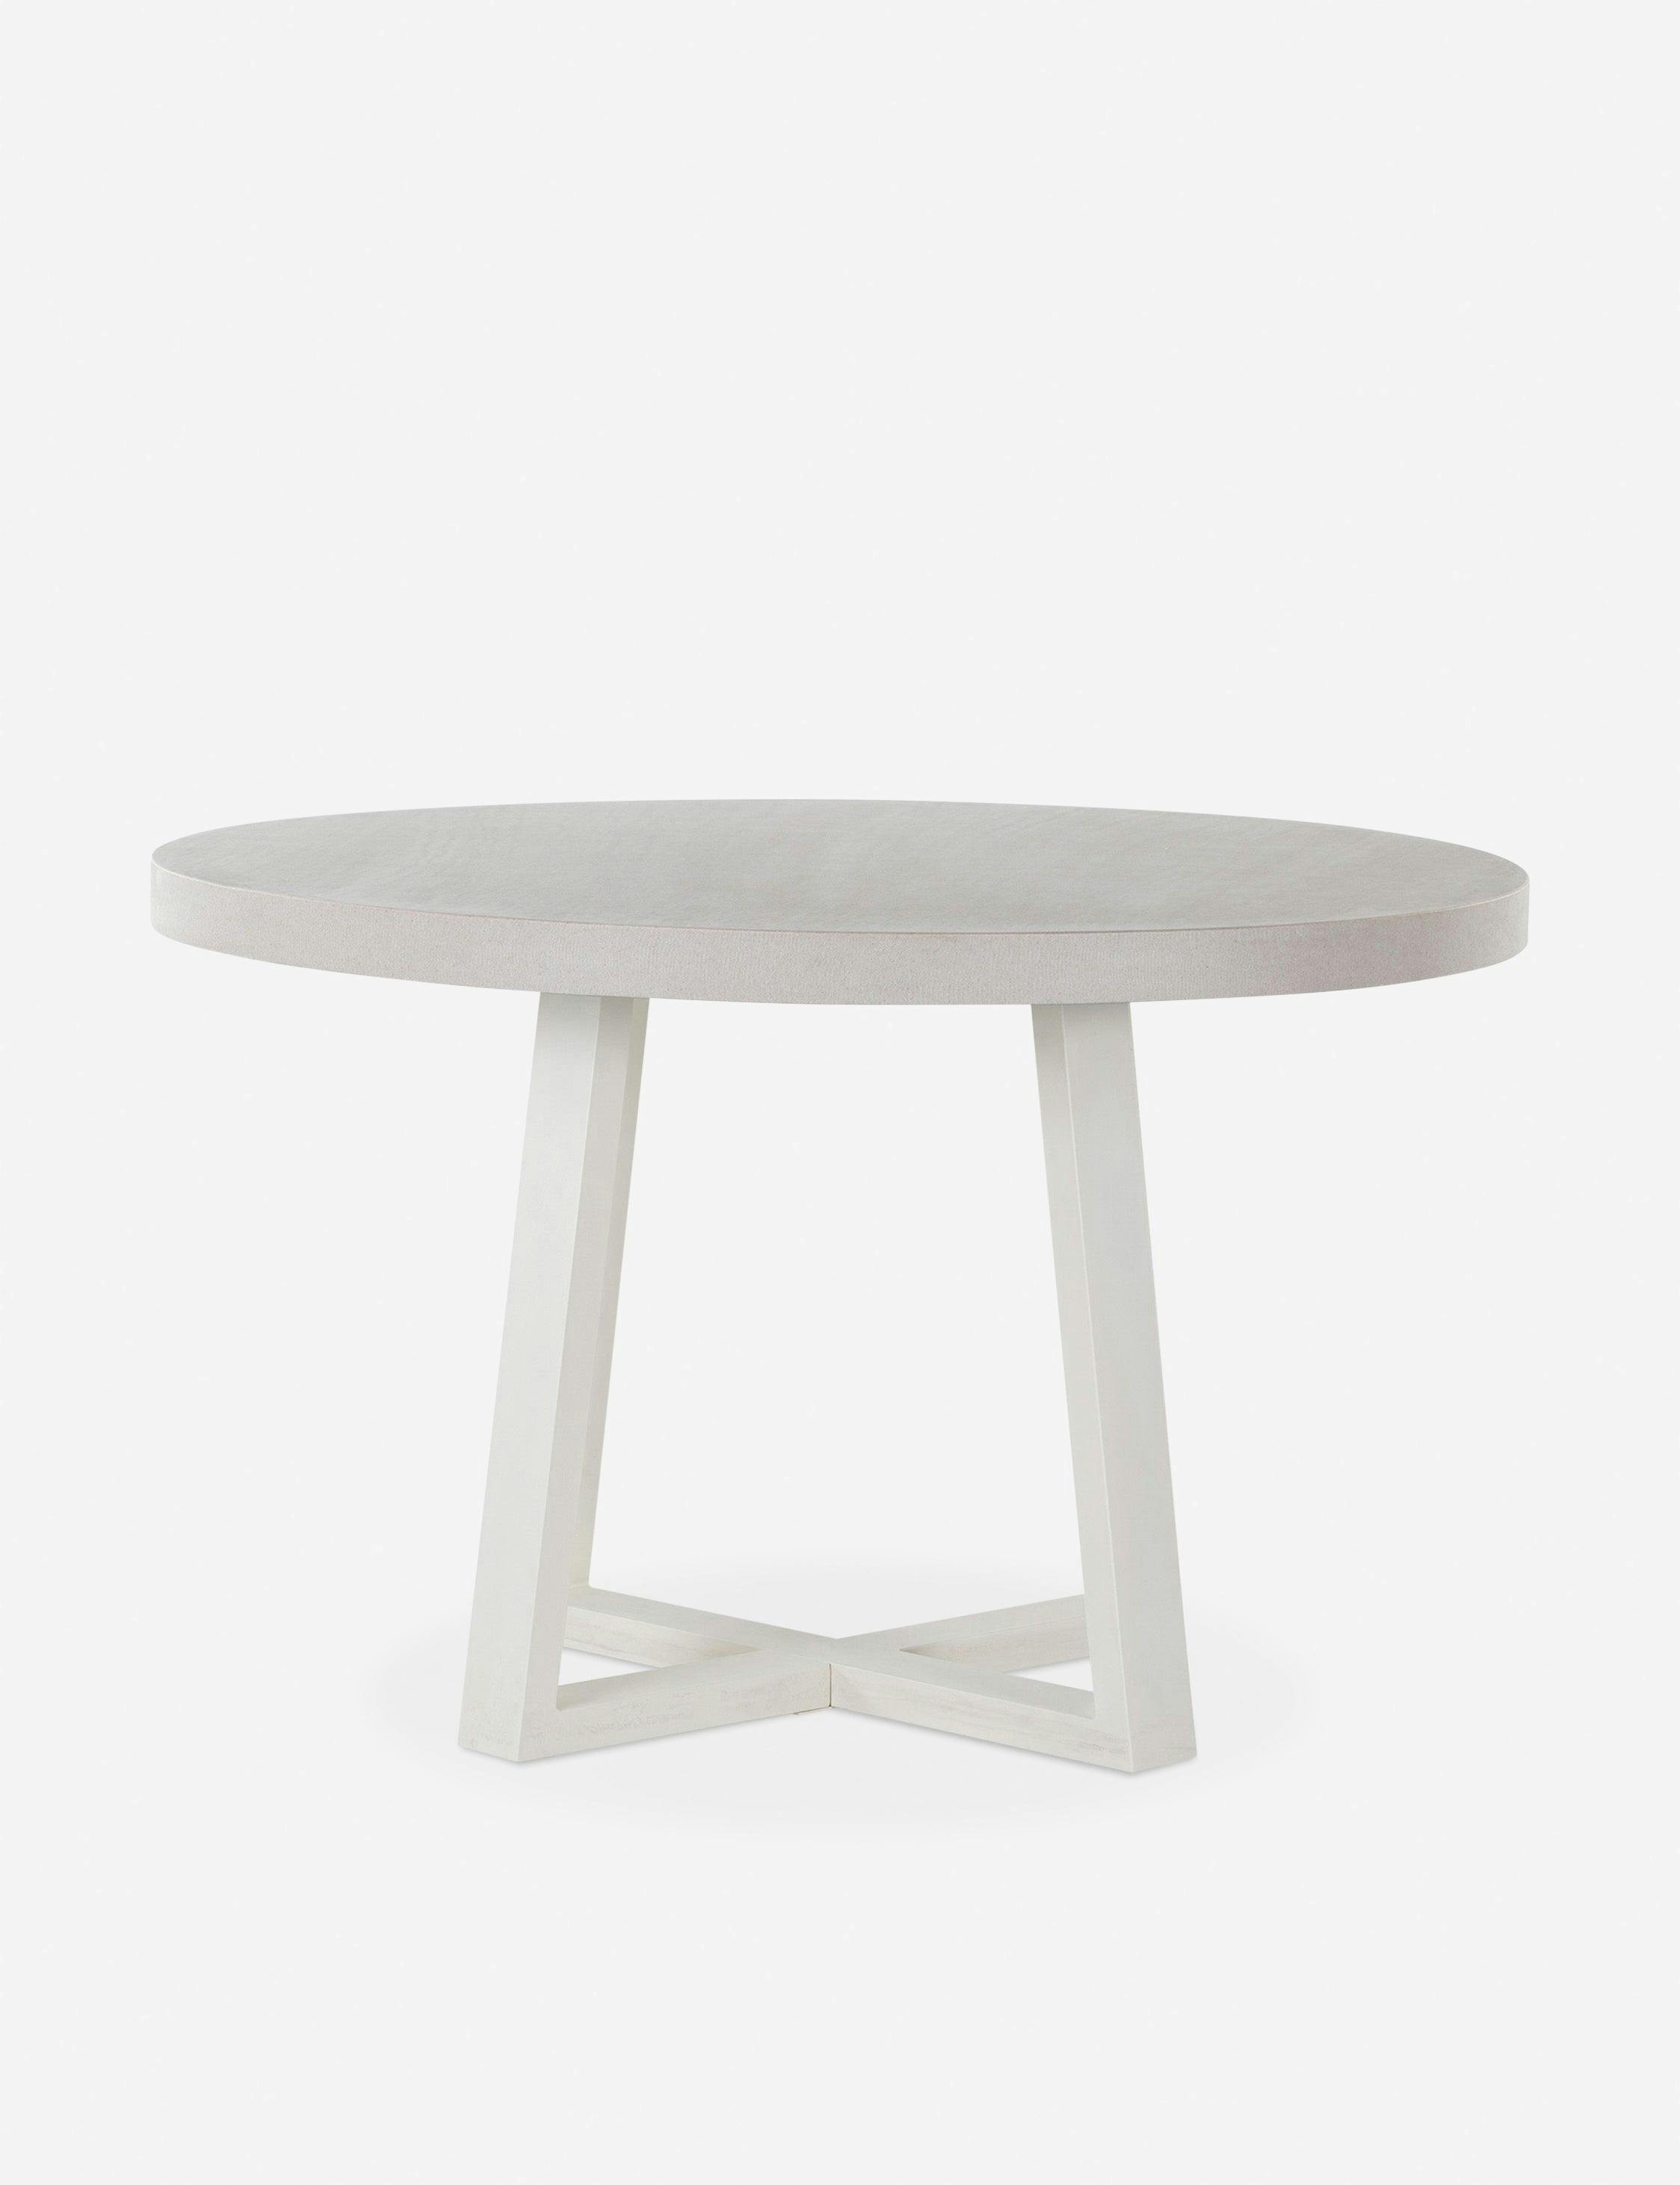 Cyrus 47'' Beige and White Round Outdoor Dining Table